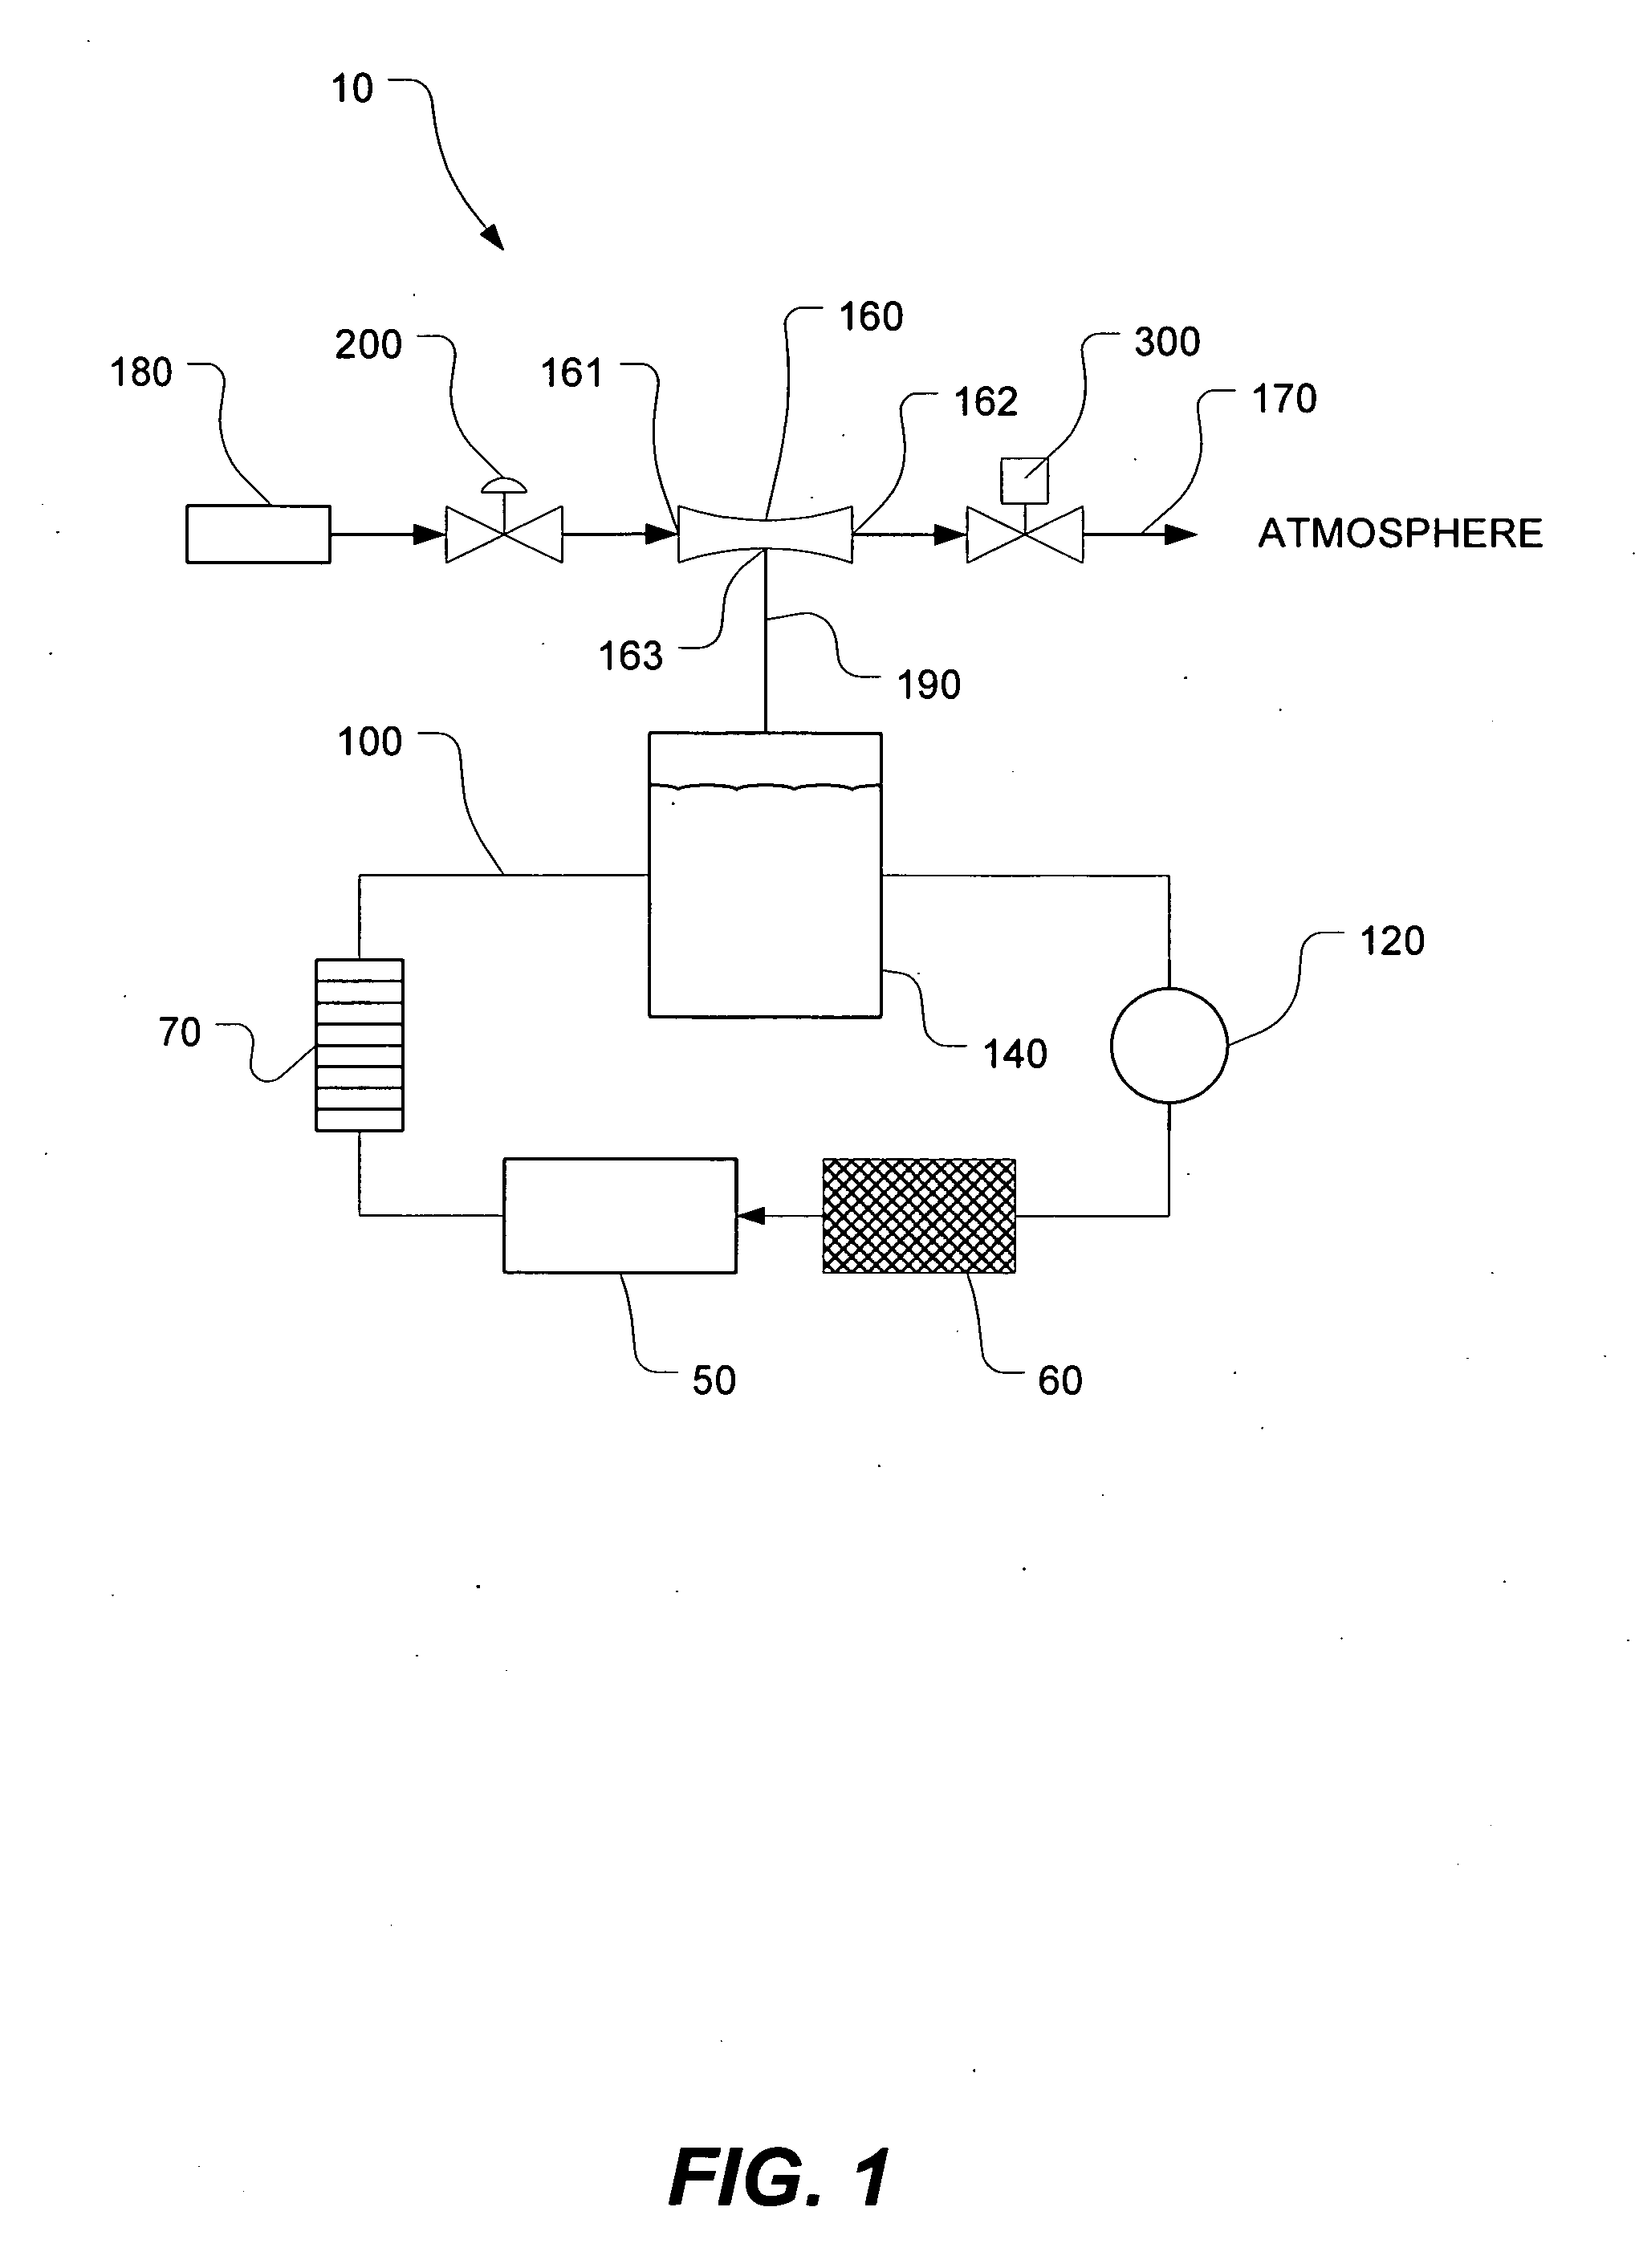 Electrochemical cell cooling system